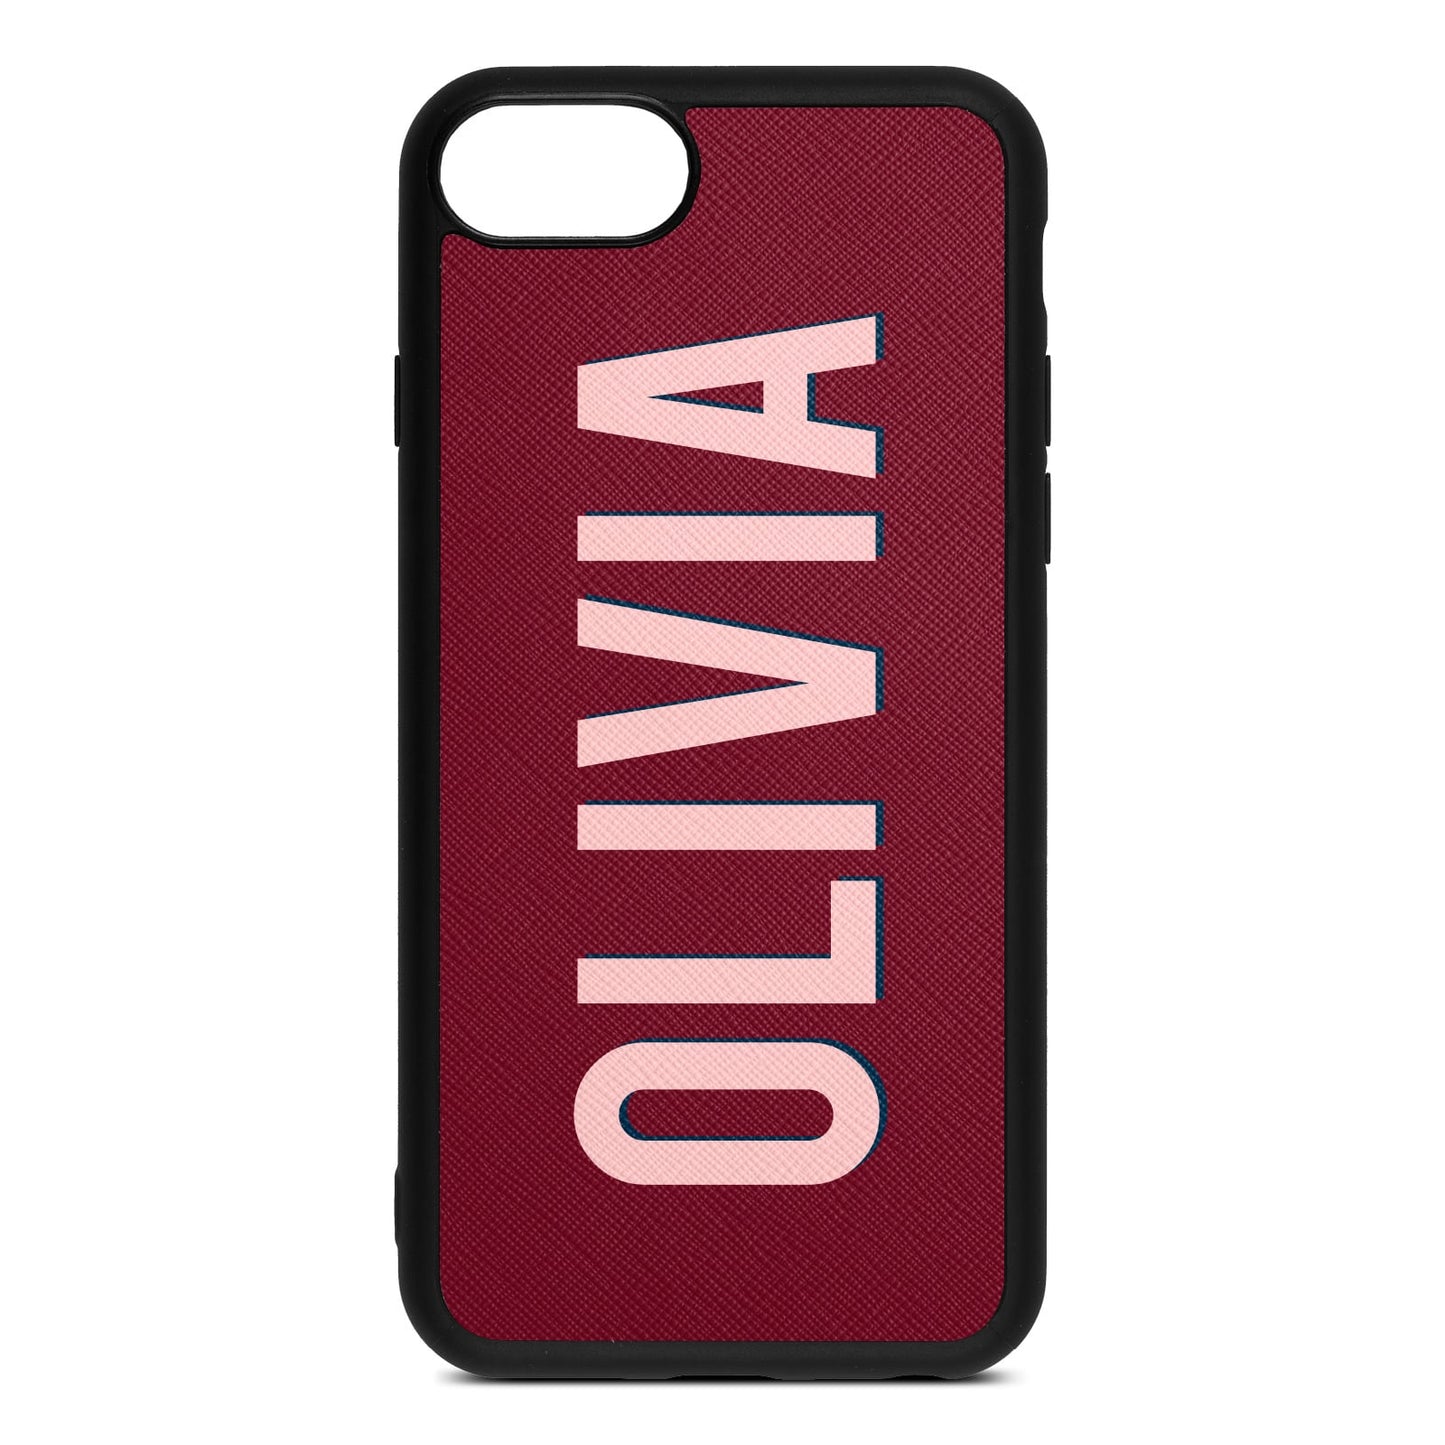 Personalised Dark Red Saffiano Leather iPhone 8 Case